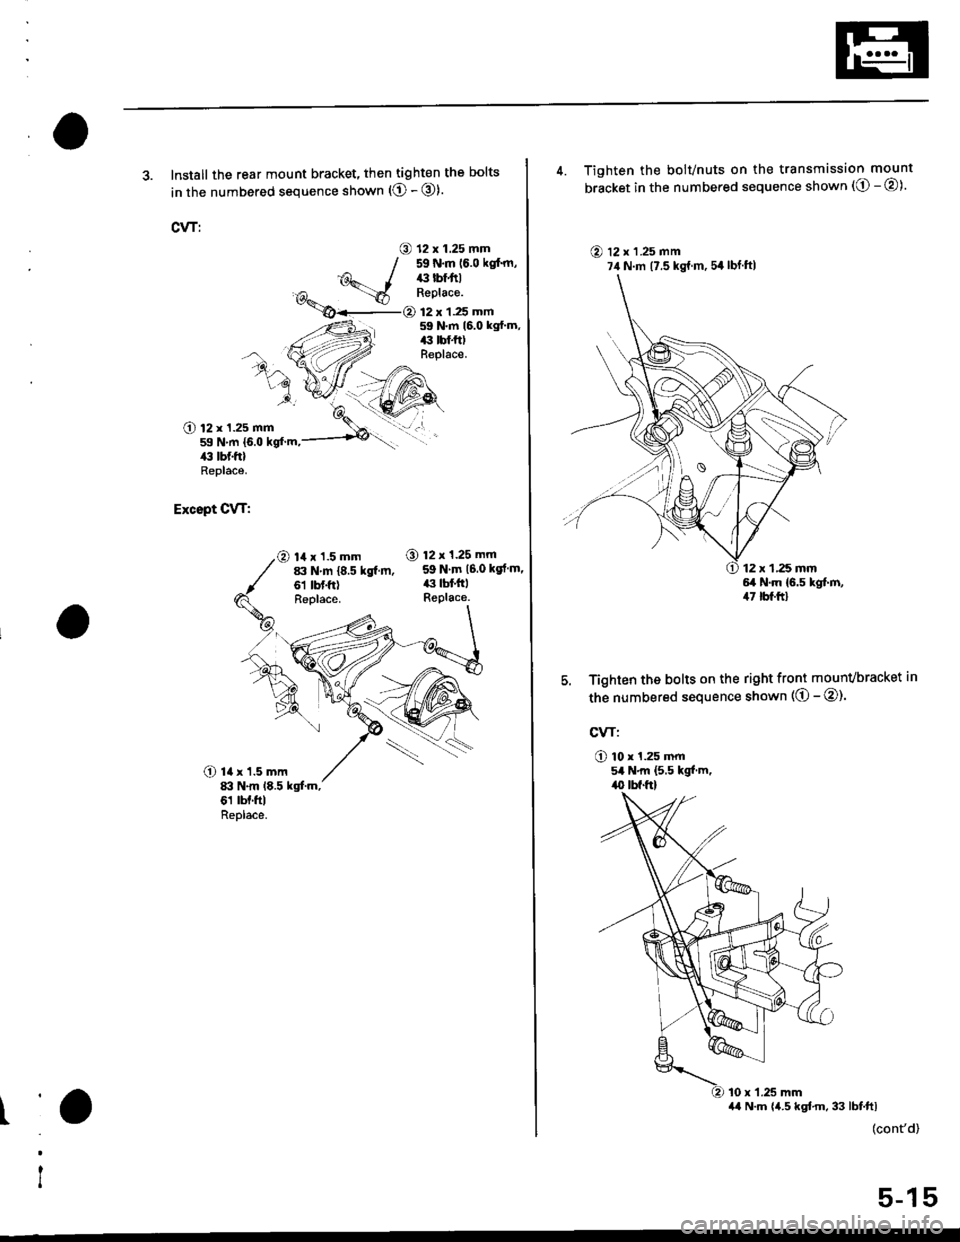 HONDA CIVIC 1998 6.G Workshop Manual 3. Install the rear mount bracket, then tighten the bolts
in the numbered sequence shown (O - @).
CVT:
O 12 x 1.25 mm59 N.m (6.0 kglm,ilil lbf ftlReplace.
12 x 1.25 mm59 N.m 16.0 kgfm,|:r tbf.tt)Rep